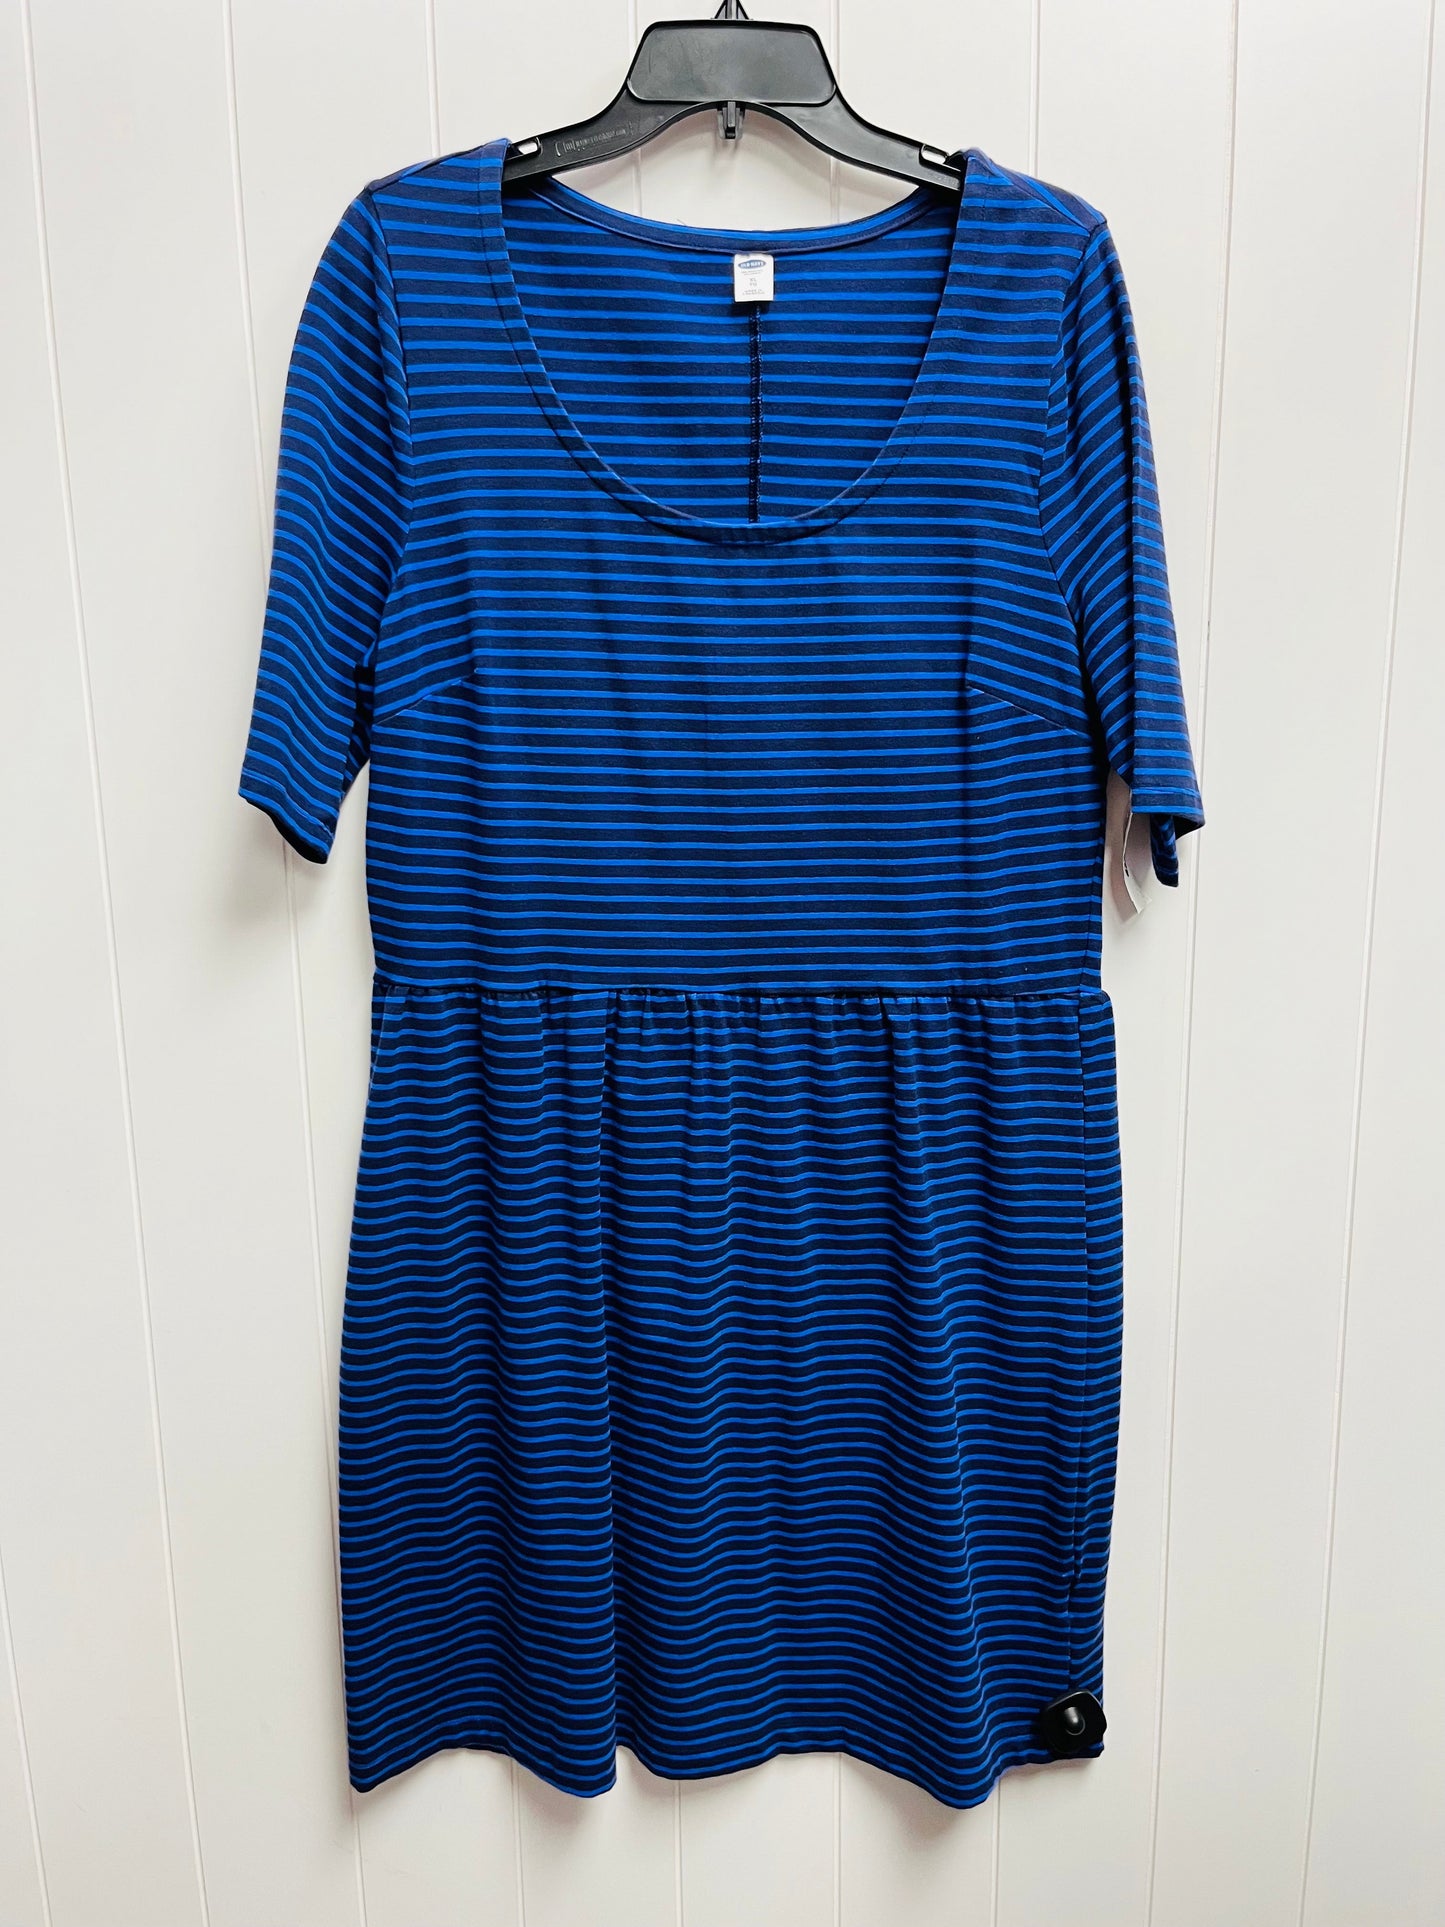 Blue Dress Casual Short Old Navy, Size Xl